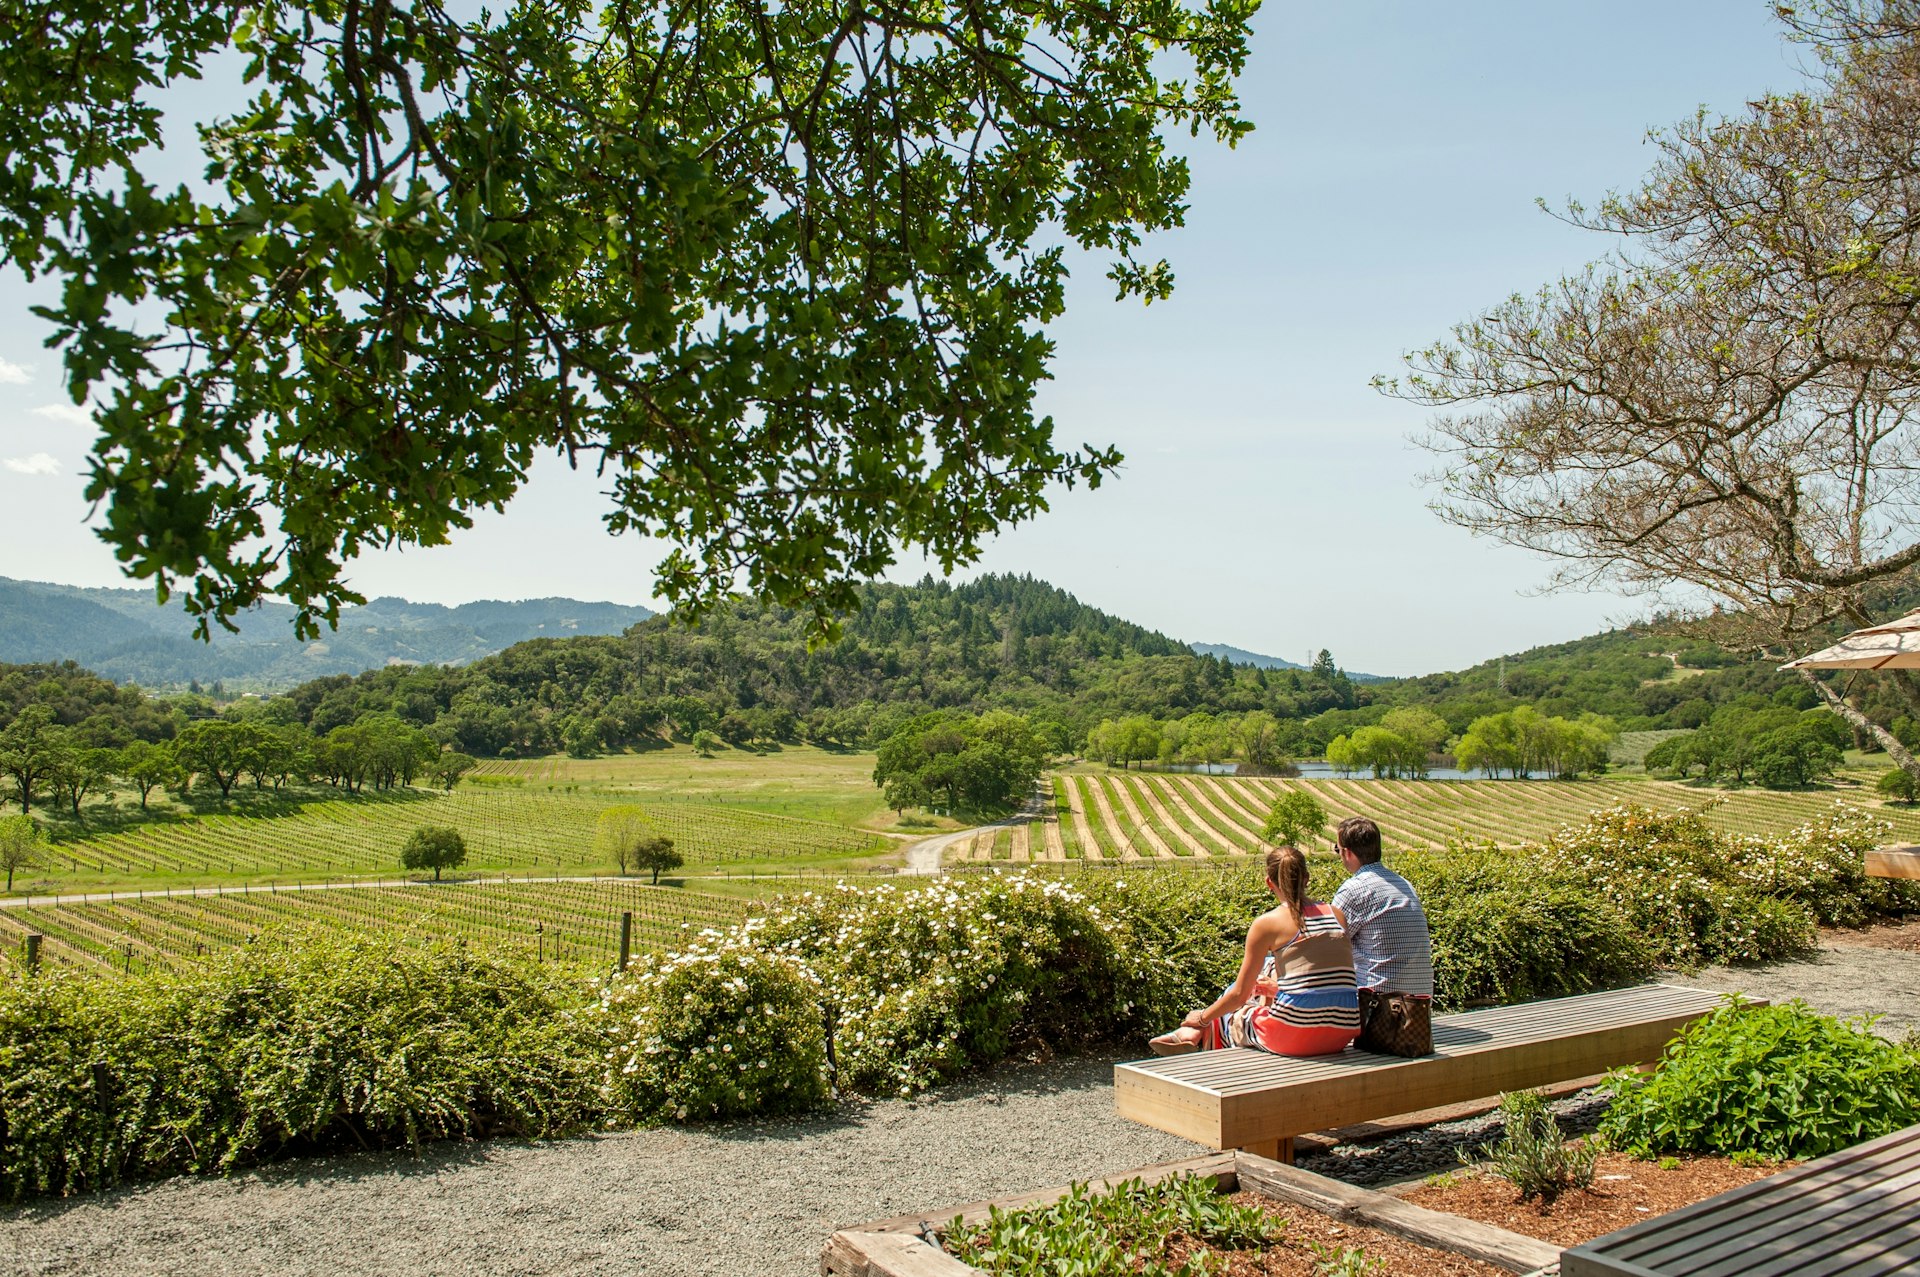 Two people sit on a bench at a winery looking out over vineyards with vines stretching down the hill in the sunshine